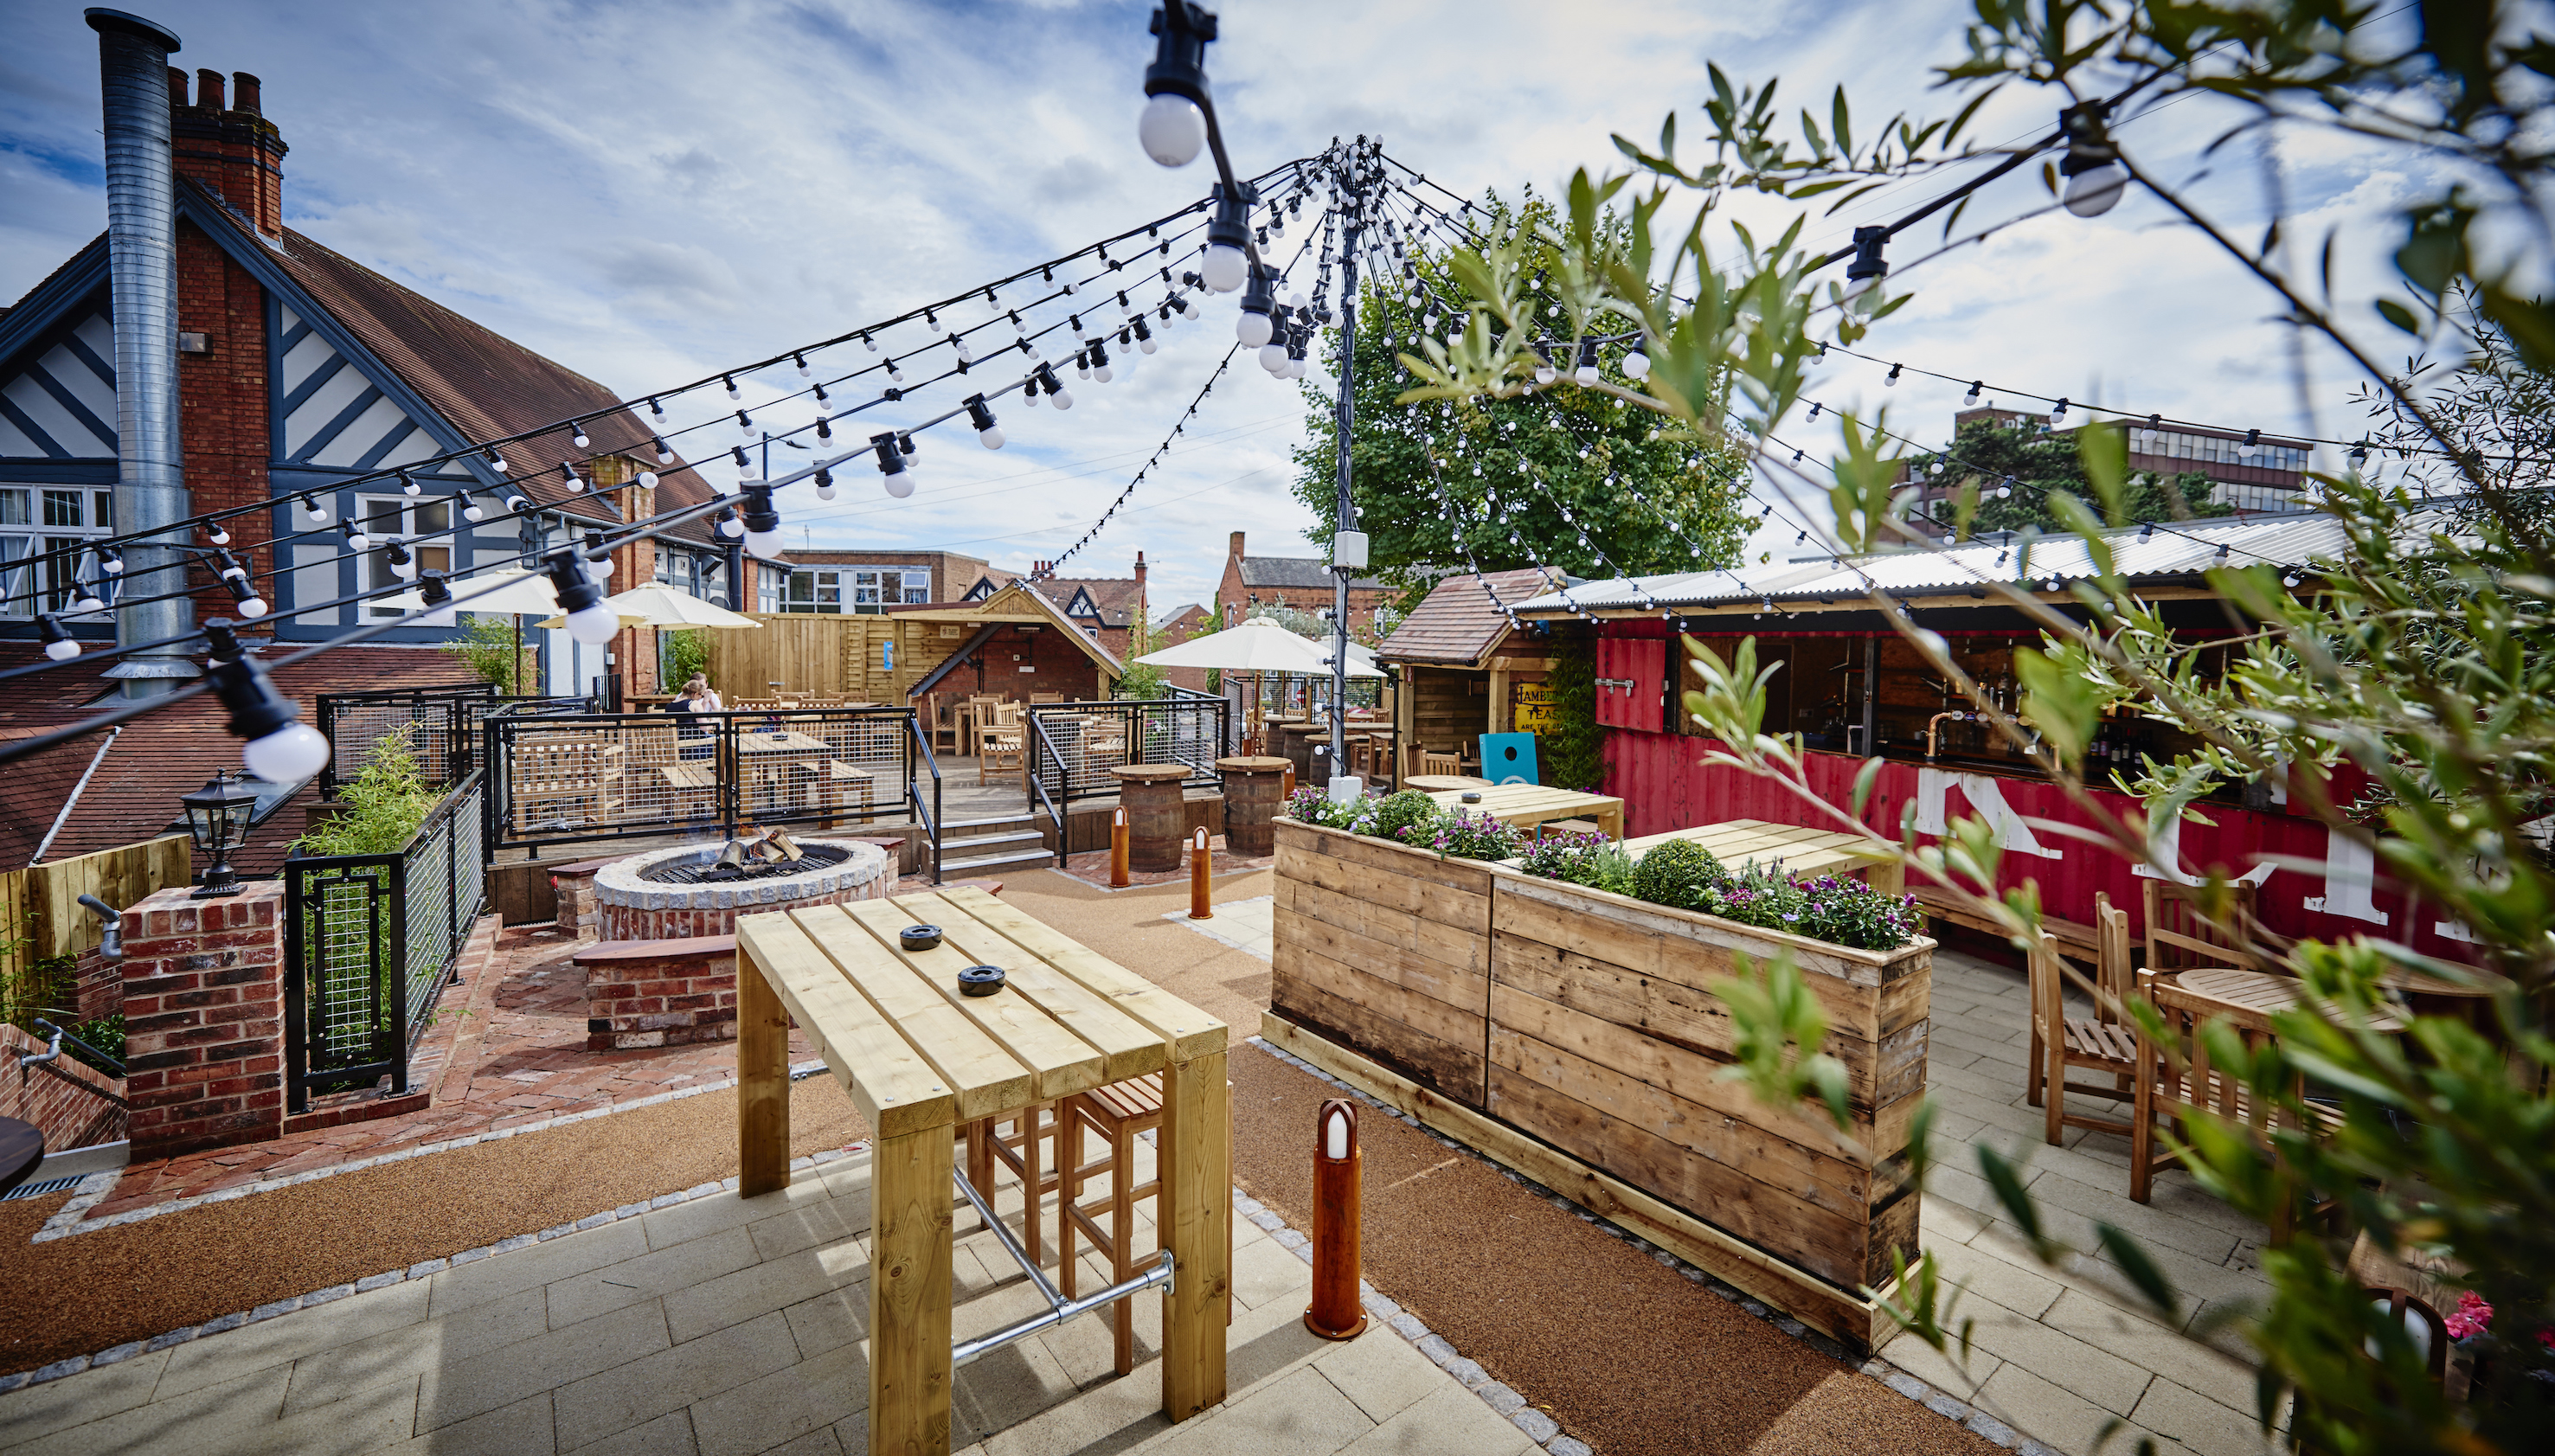 News: There’s a new garden area ‘Hopping Up’ in Sutton Coldfield at Brewhouse & Kitchen